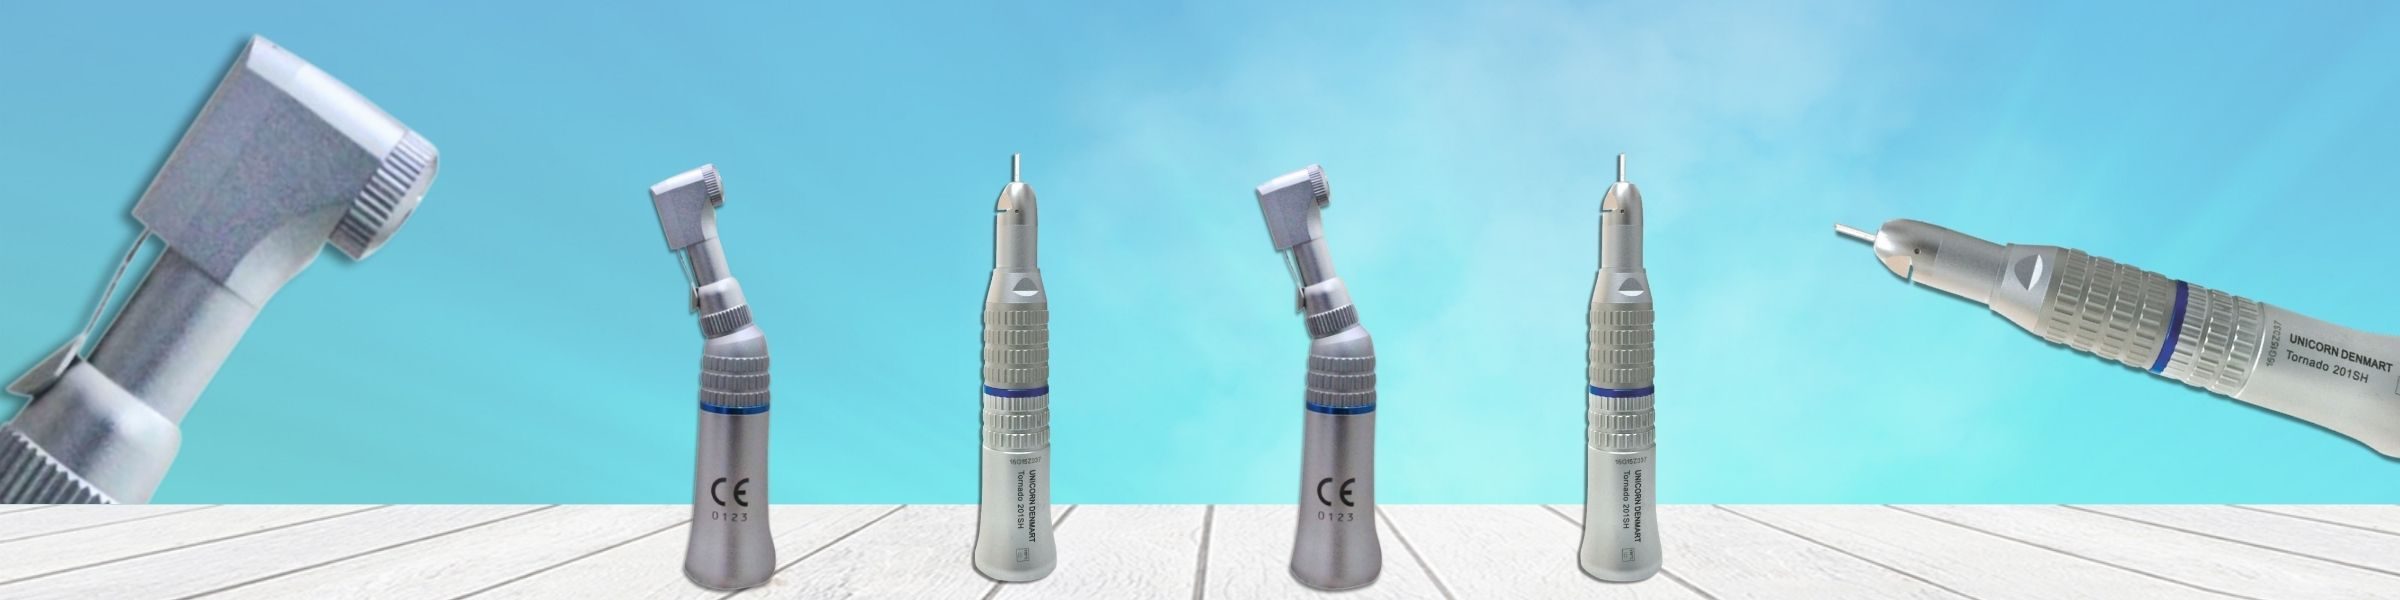 Low Speed Dental Handpiece Category Banners